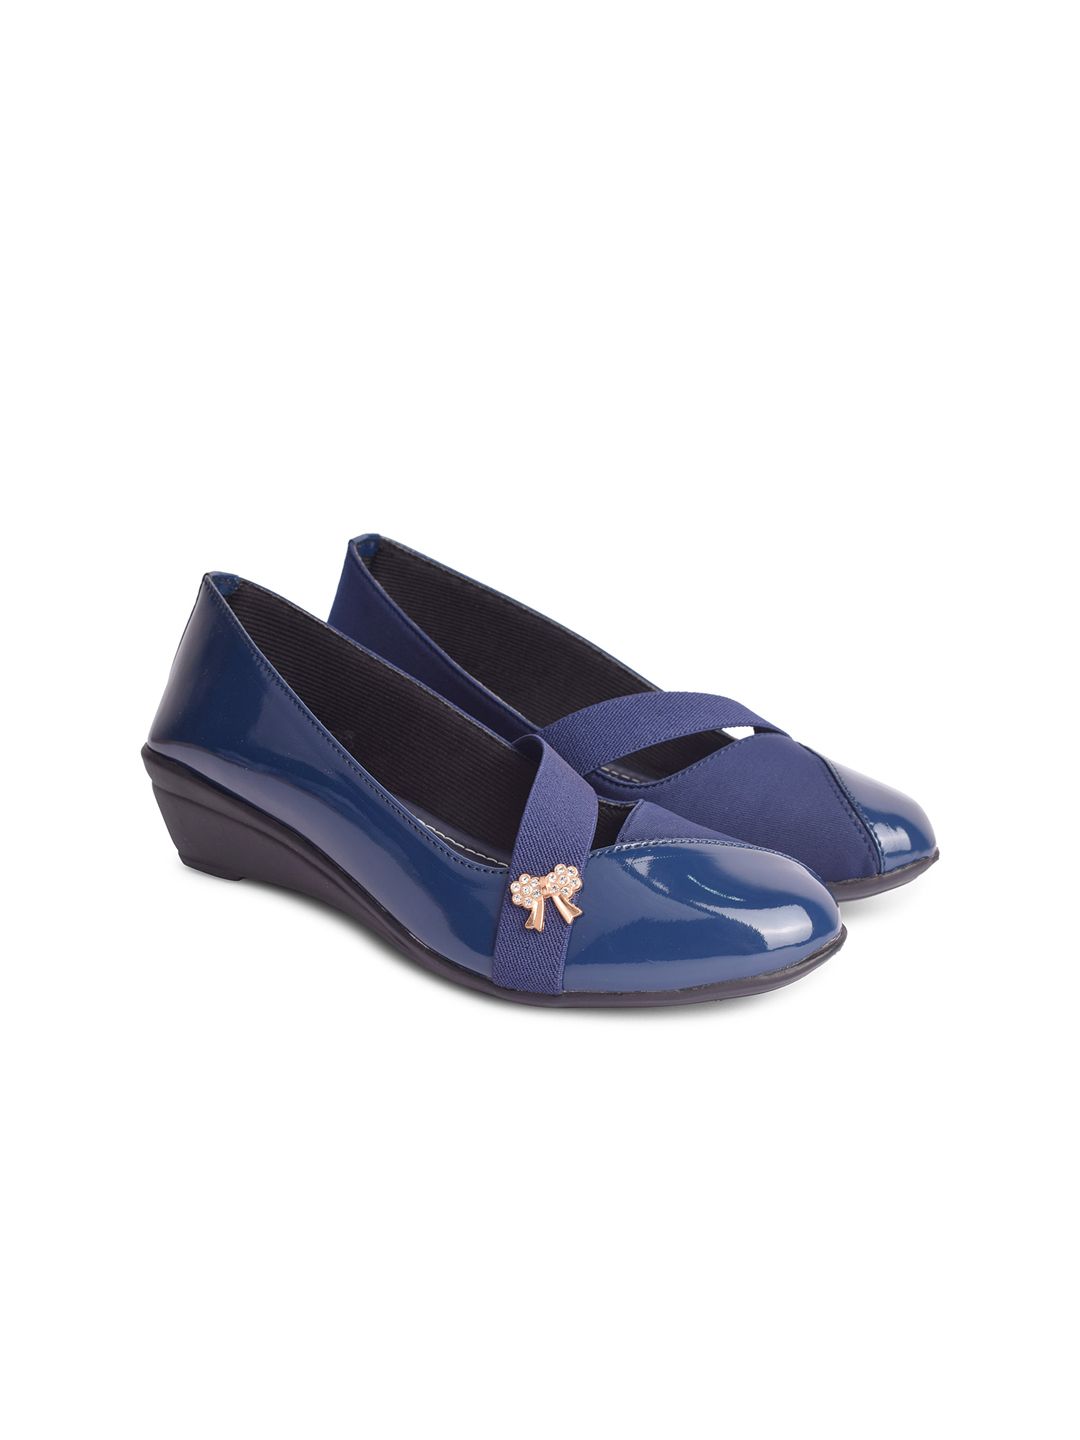 XE LOOKS Navy Blue Wedge Pumps Price in India